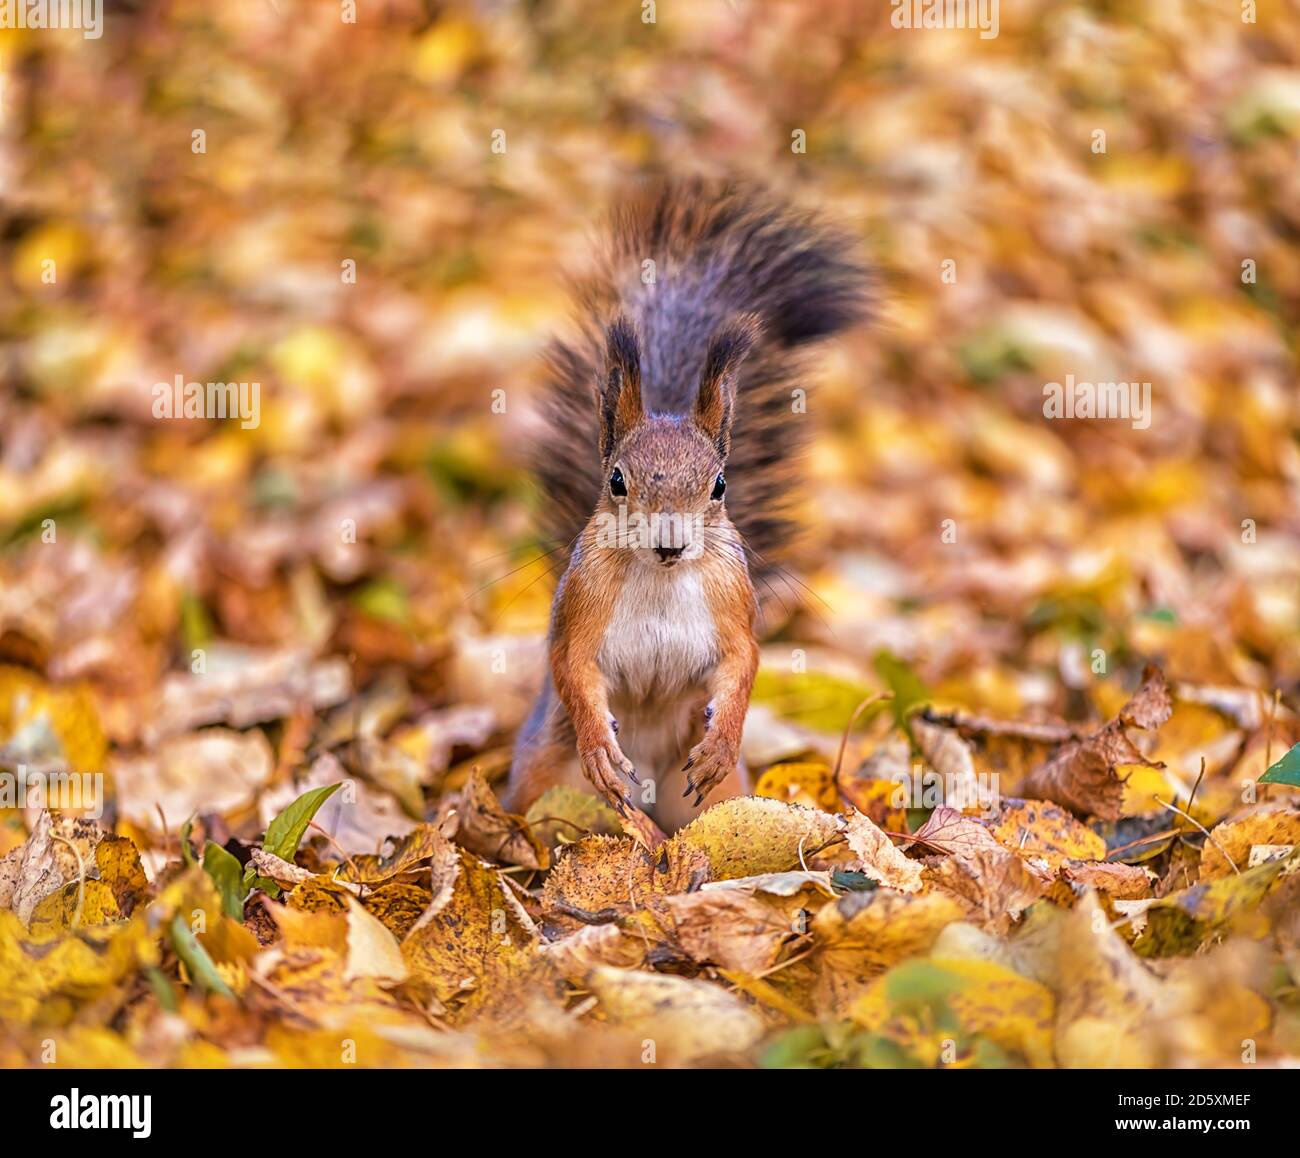 beautiful bright red squirrel among autumn leaves Stock Photo